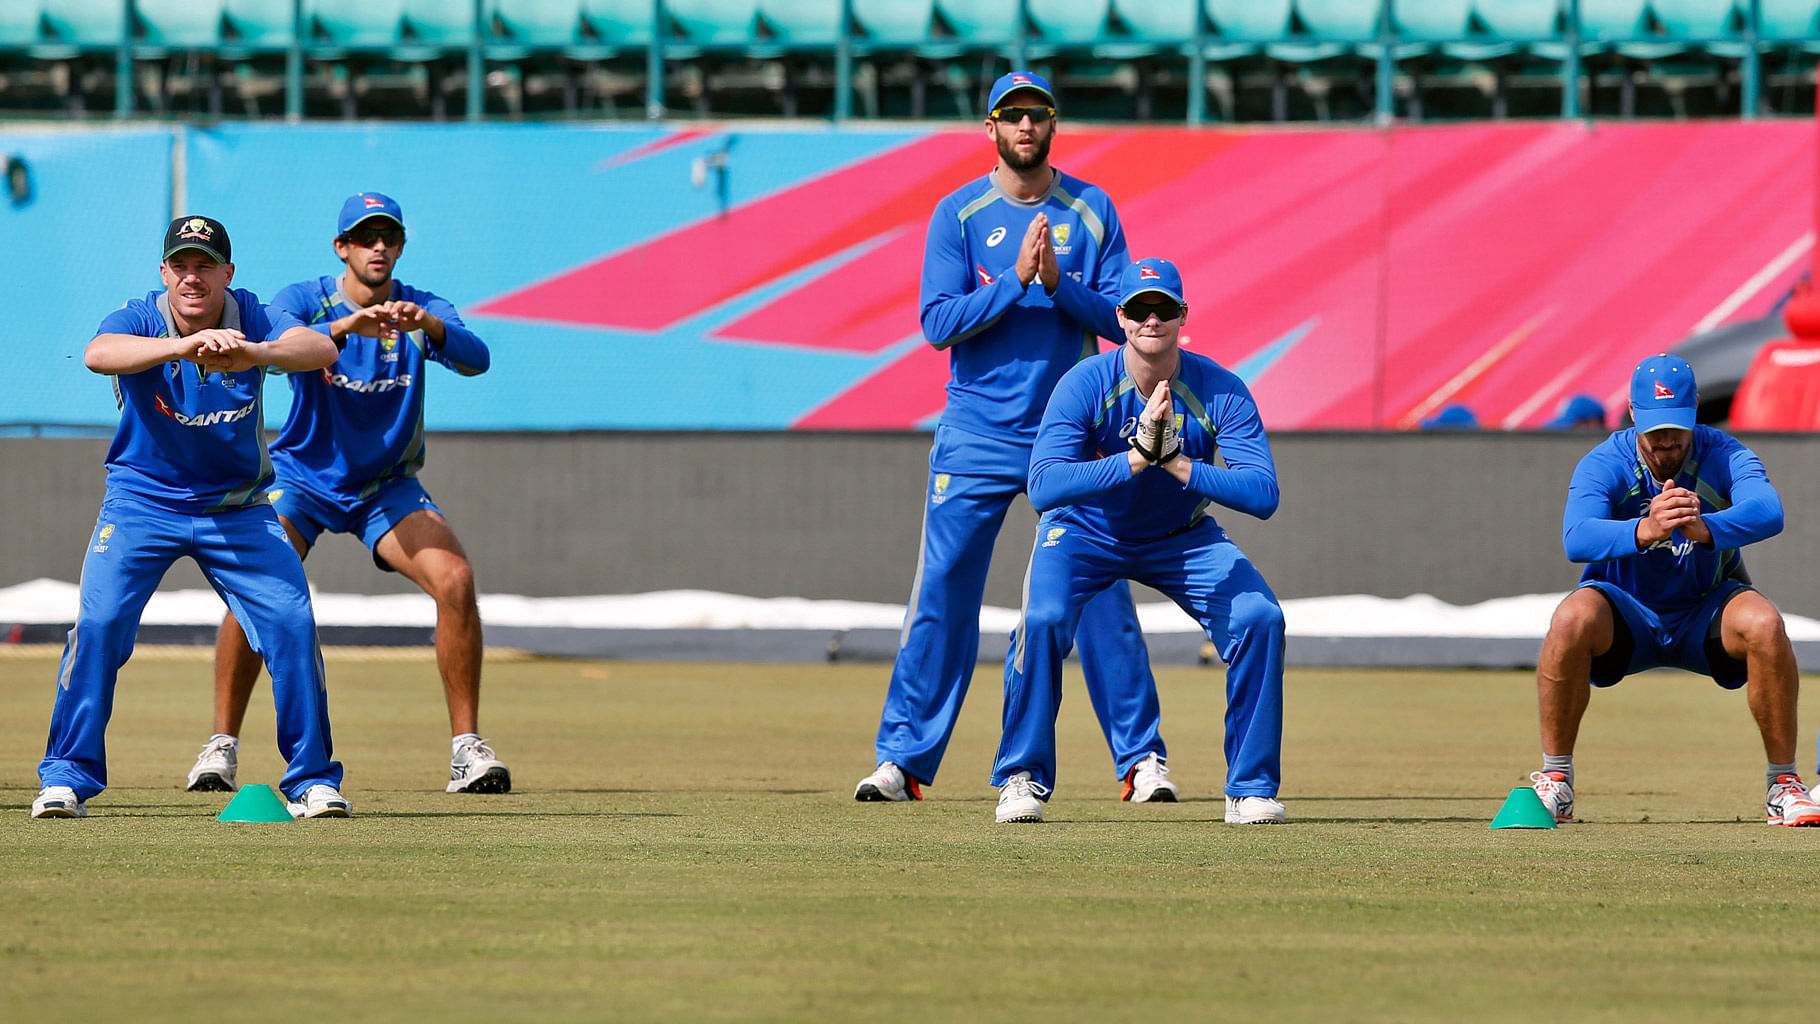 

Australian team practices  ahead of its match against New Zealand during the ICC World Twenty20. (Photo: AP)